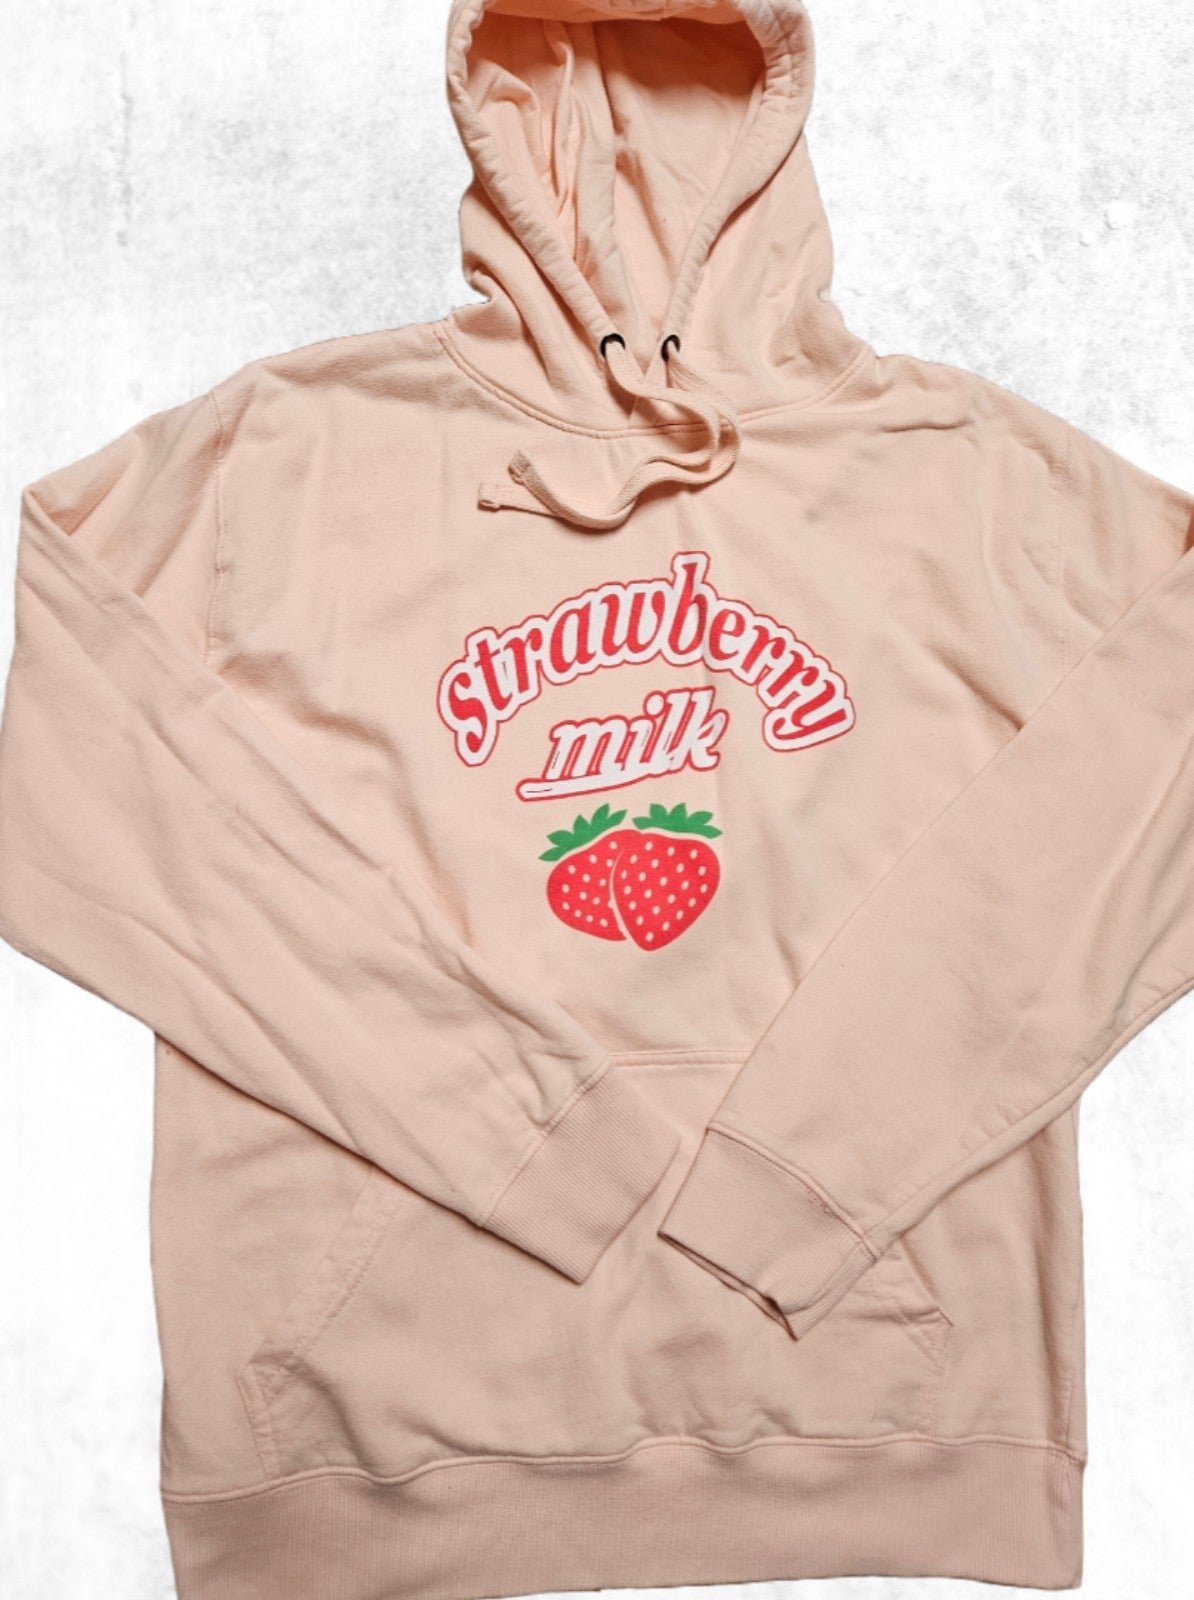 the Lowest price Hot Topic Strawberry Milk Womens Medium Pullover Hoodie Long Sleeve Sweater Pink natrDOIe3 Fashion